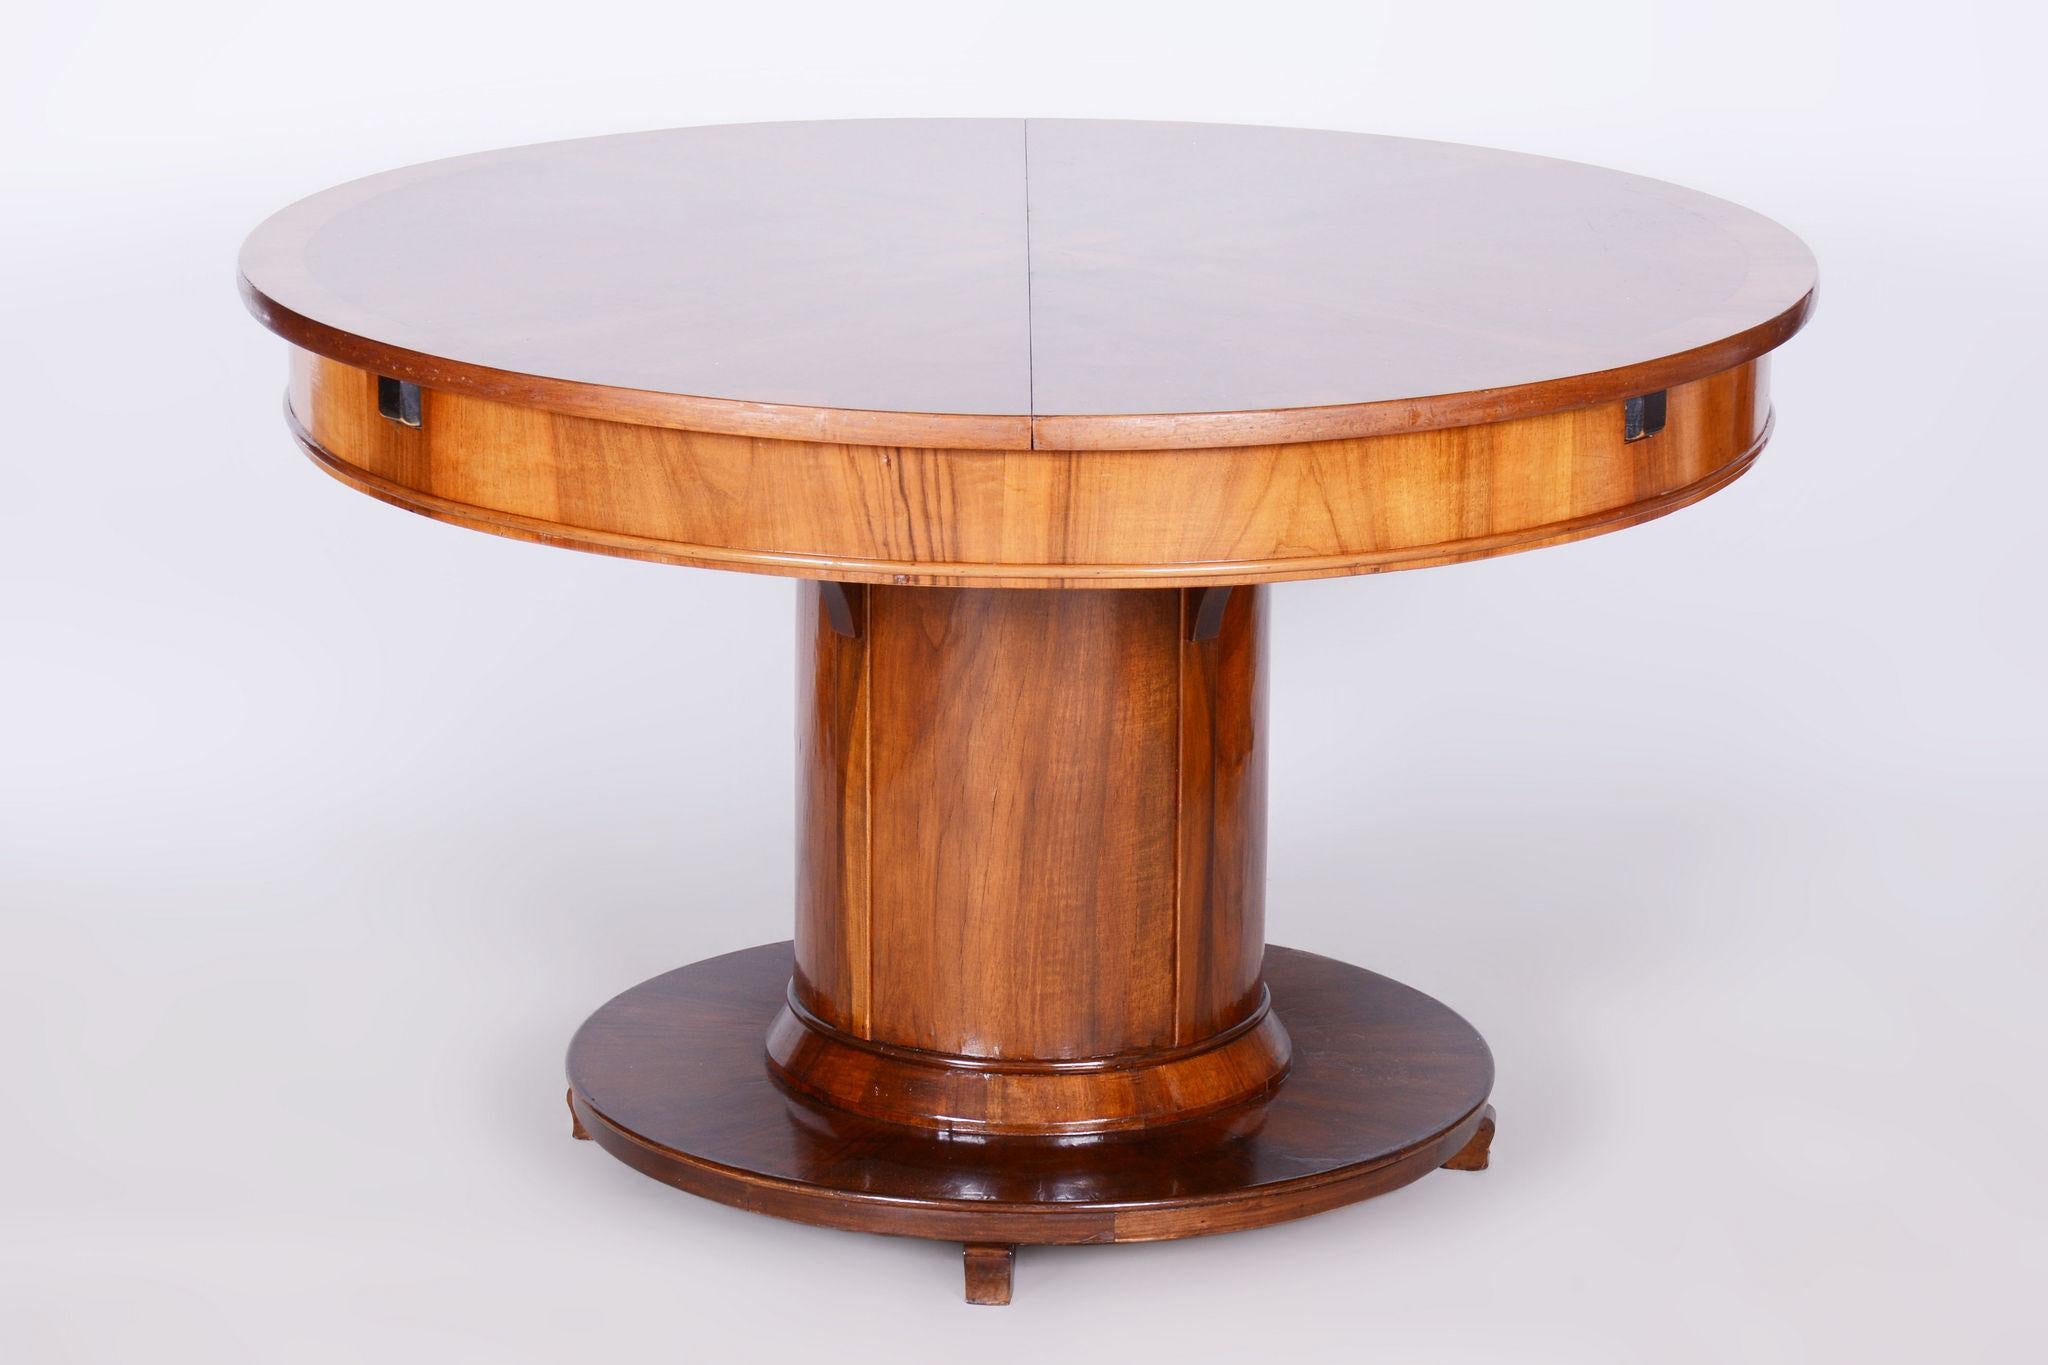 Extendable folding dining table
Period: 1920-1929
Material: Walnut,Spruce Veneer
Dissociative: 193 cm

It has been re-polished with polyutherane piano lacquer by our professional refurbishing team in Czechia according to the original